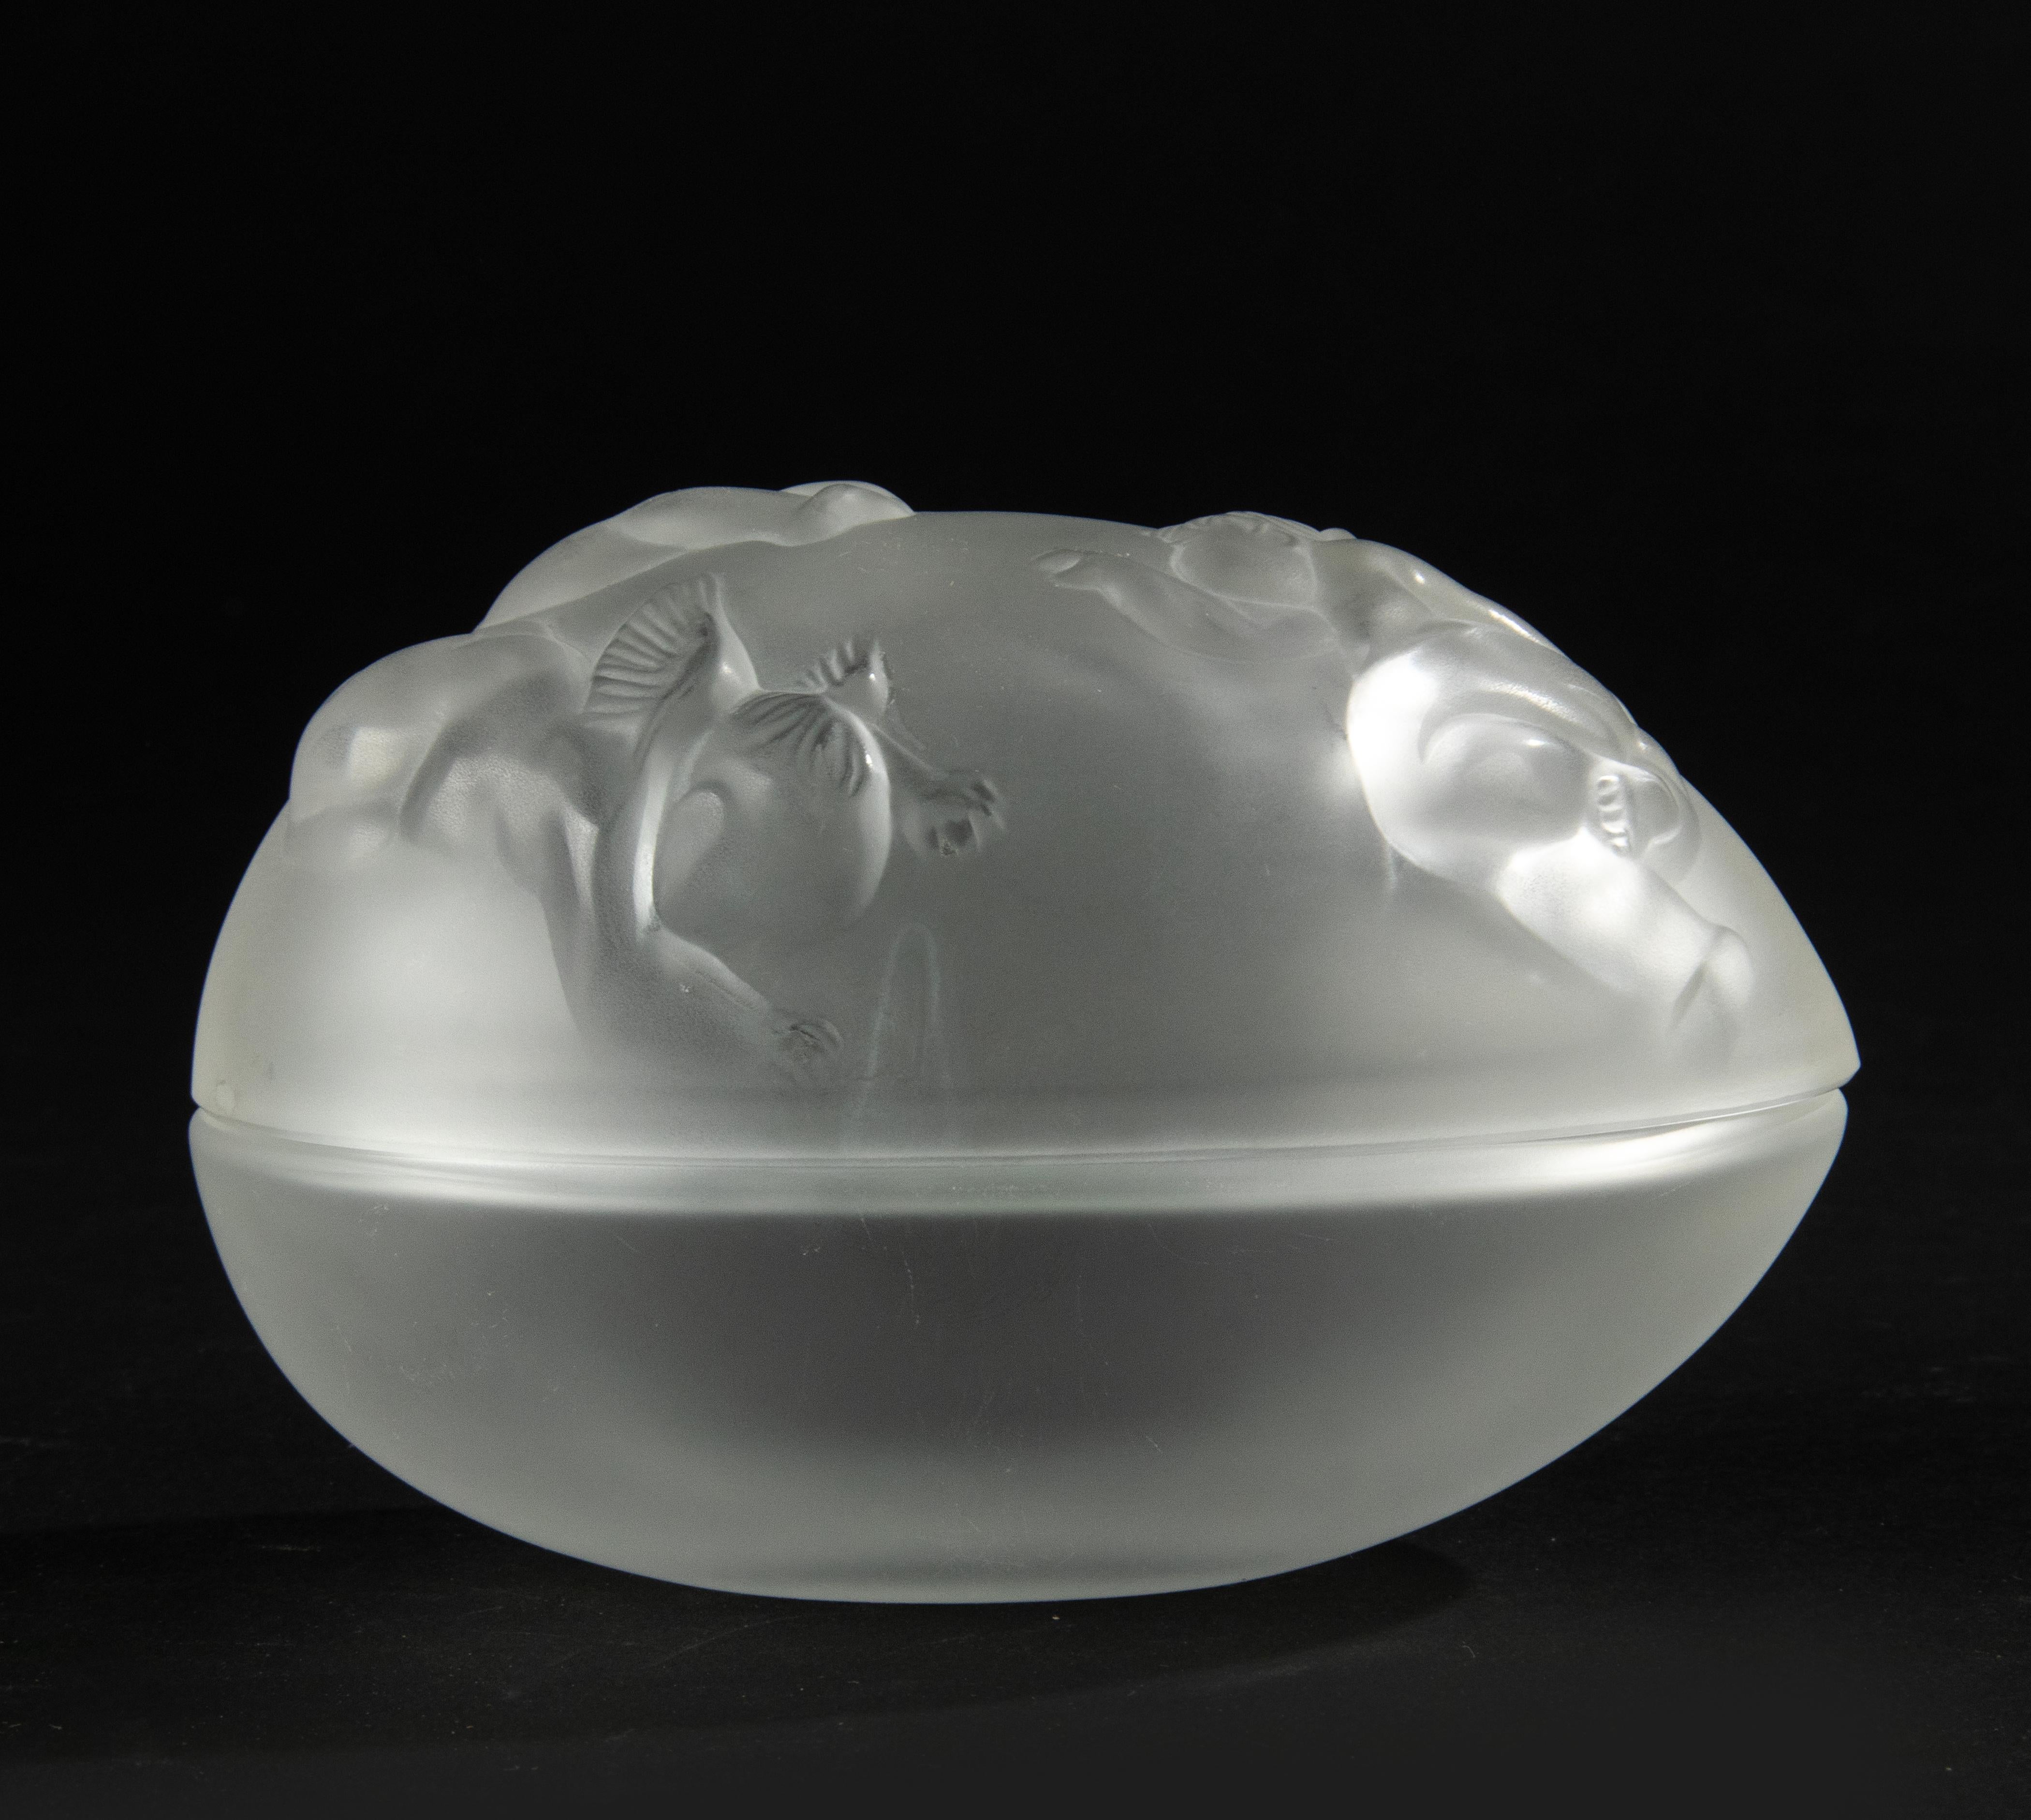 A beautiful crystal box, shaped like an egg, made by the French maker Lalique. Beautifully decorated with a decoration of angels, satin-finished crystal. The original name of this box is 'Boîte Angelots'.
The bottom is signed. The box is in very